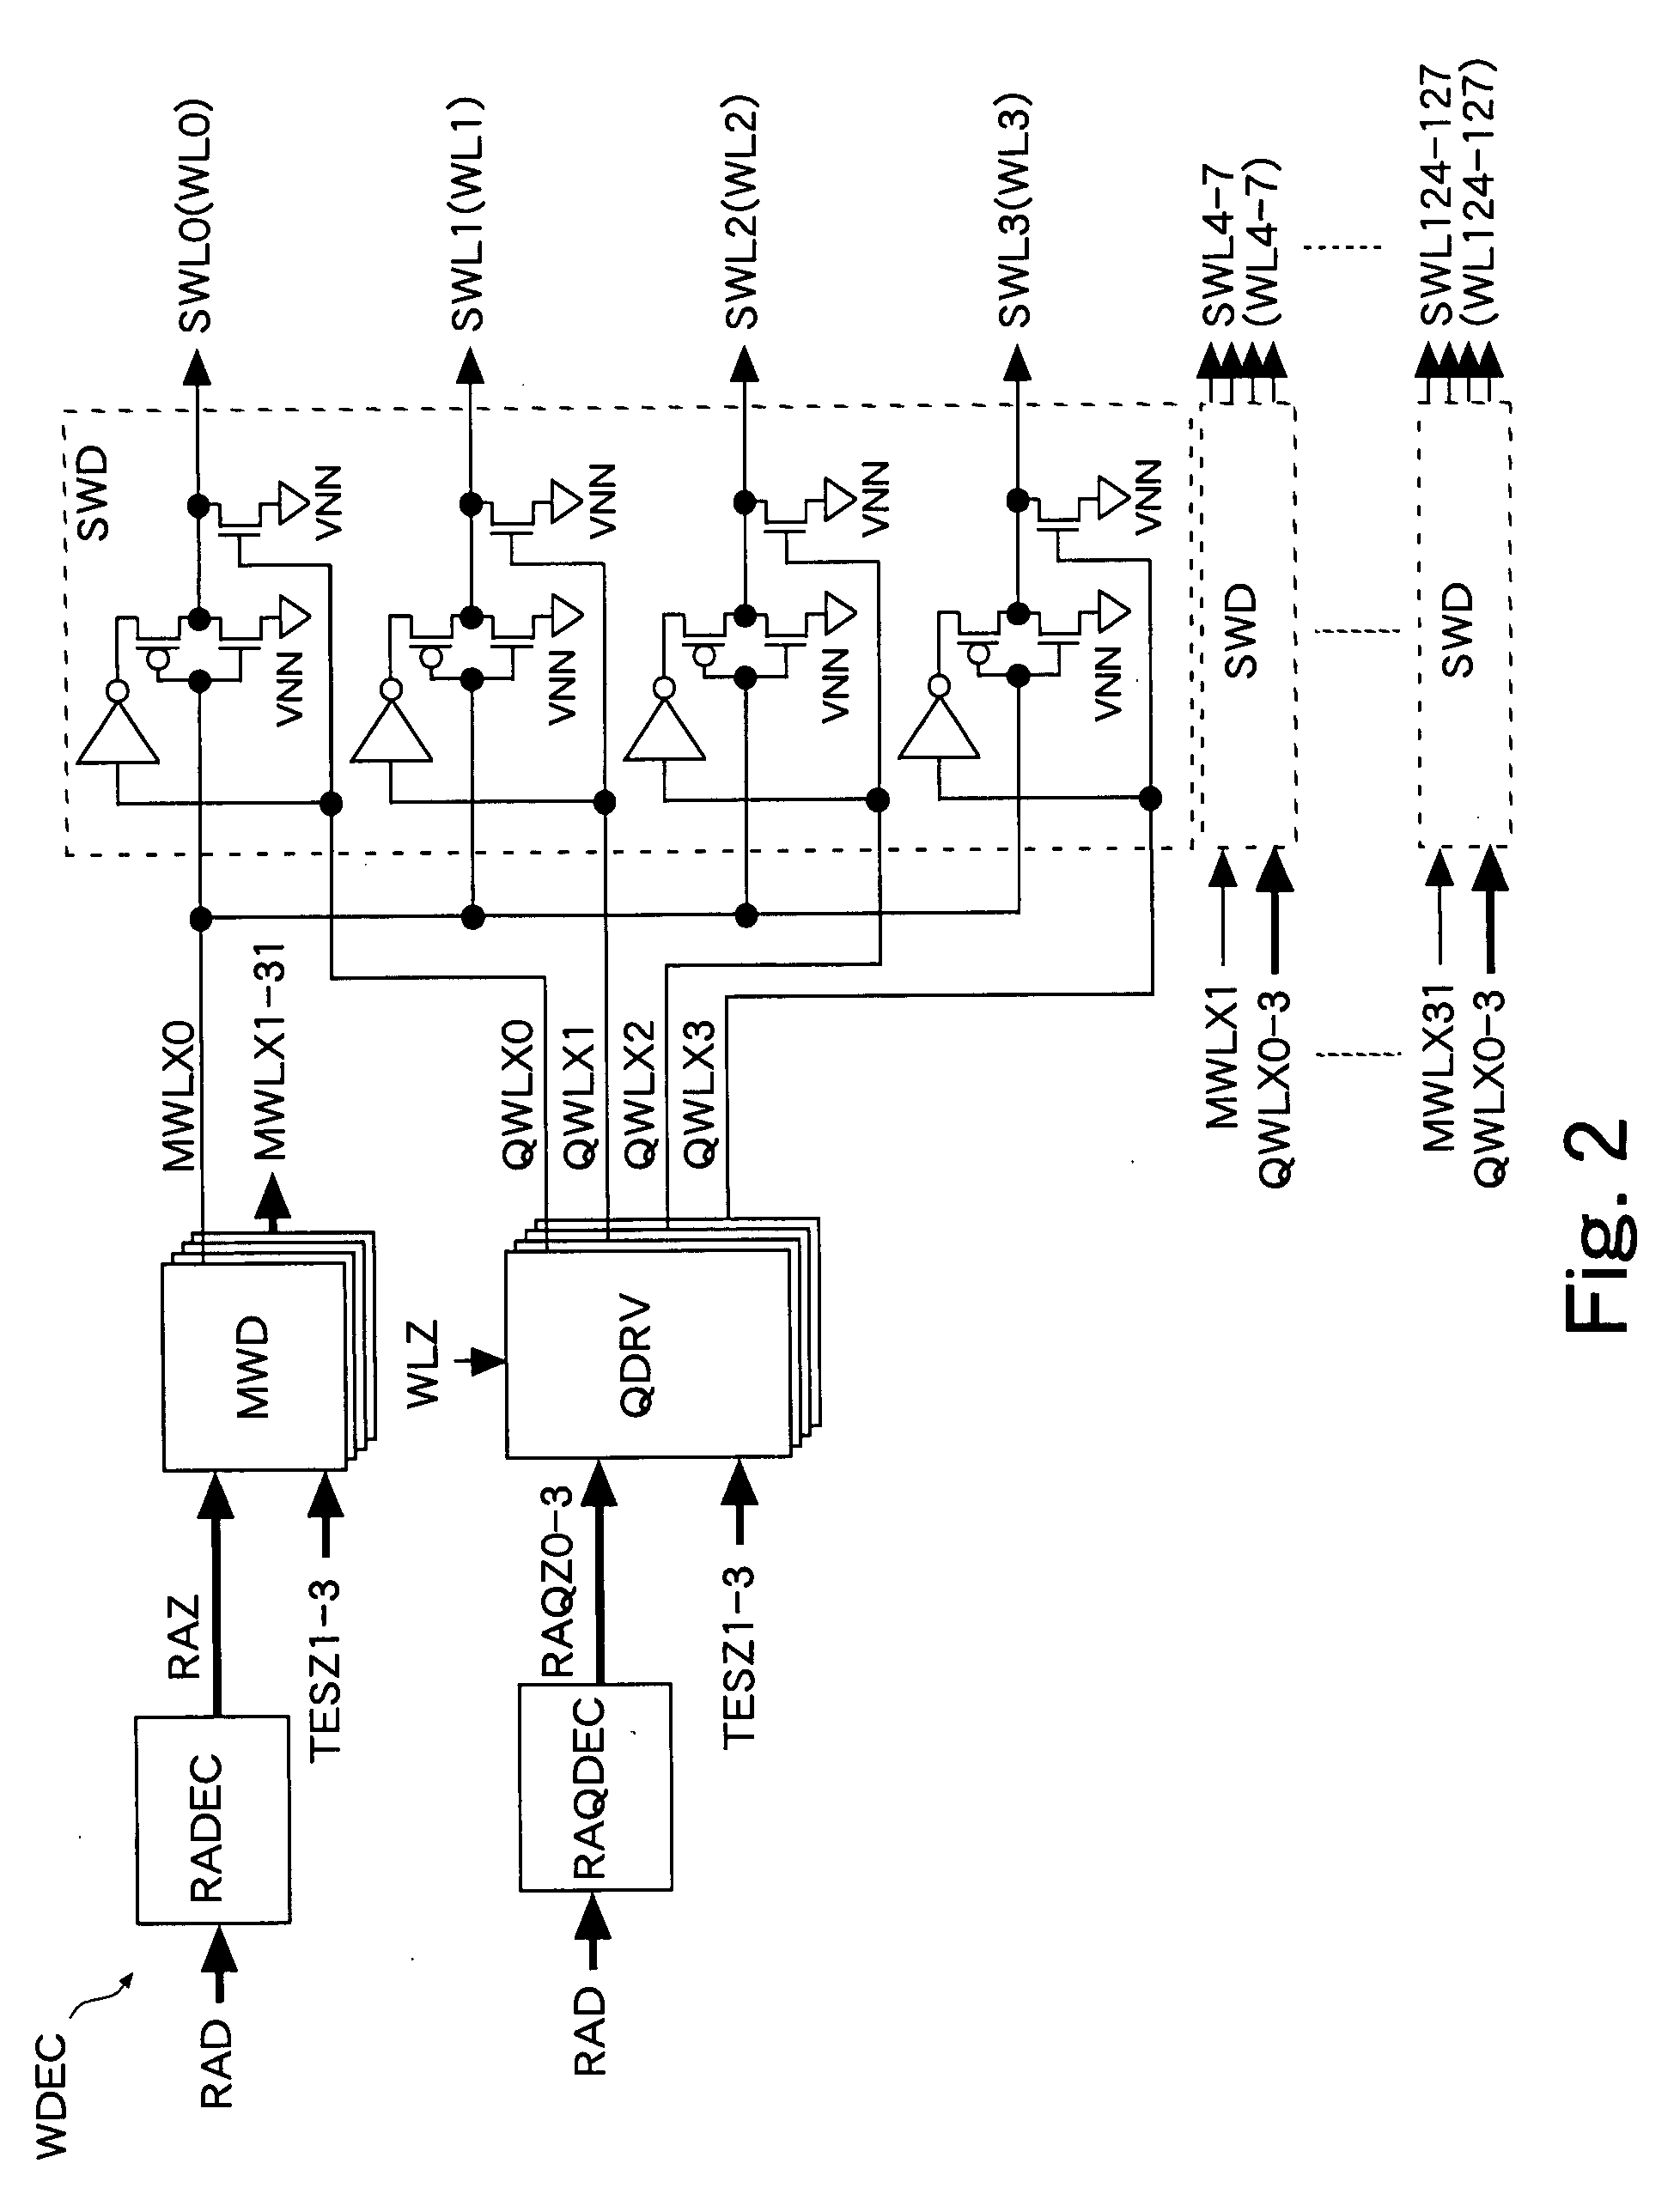 Semiconductor memory and system